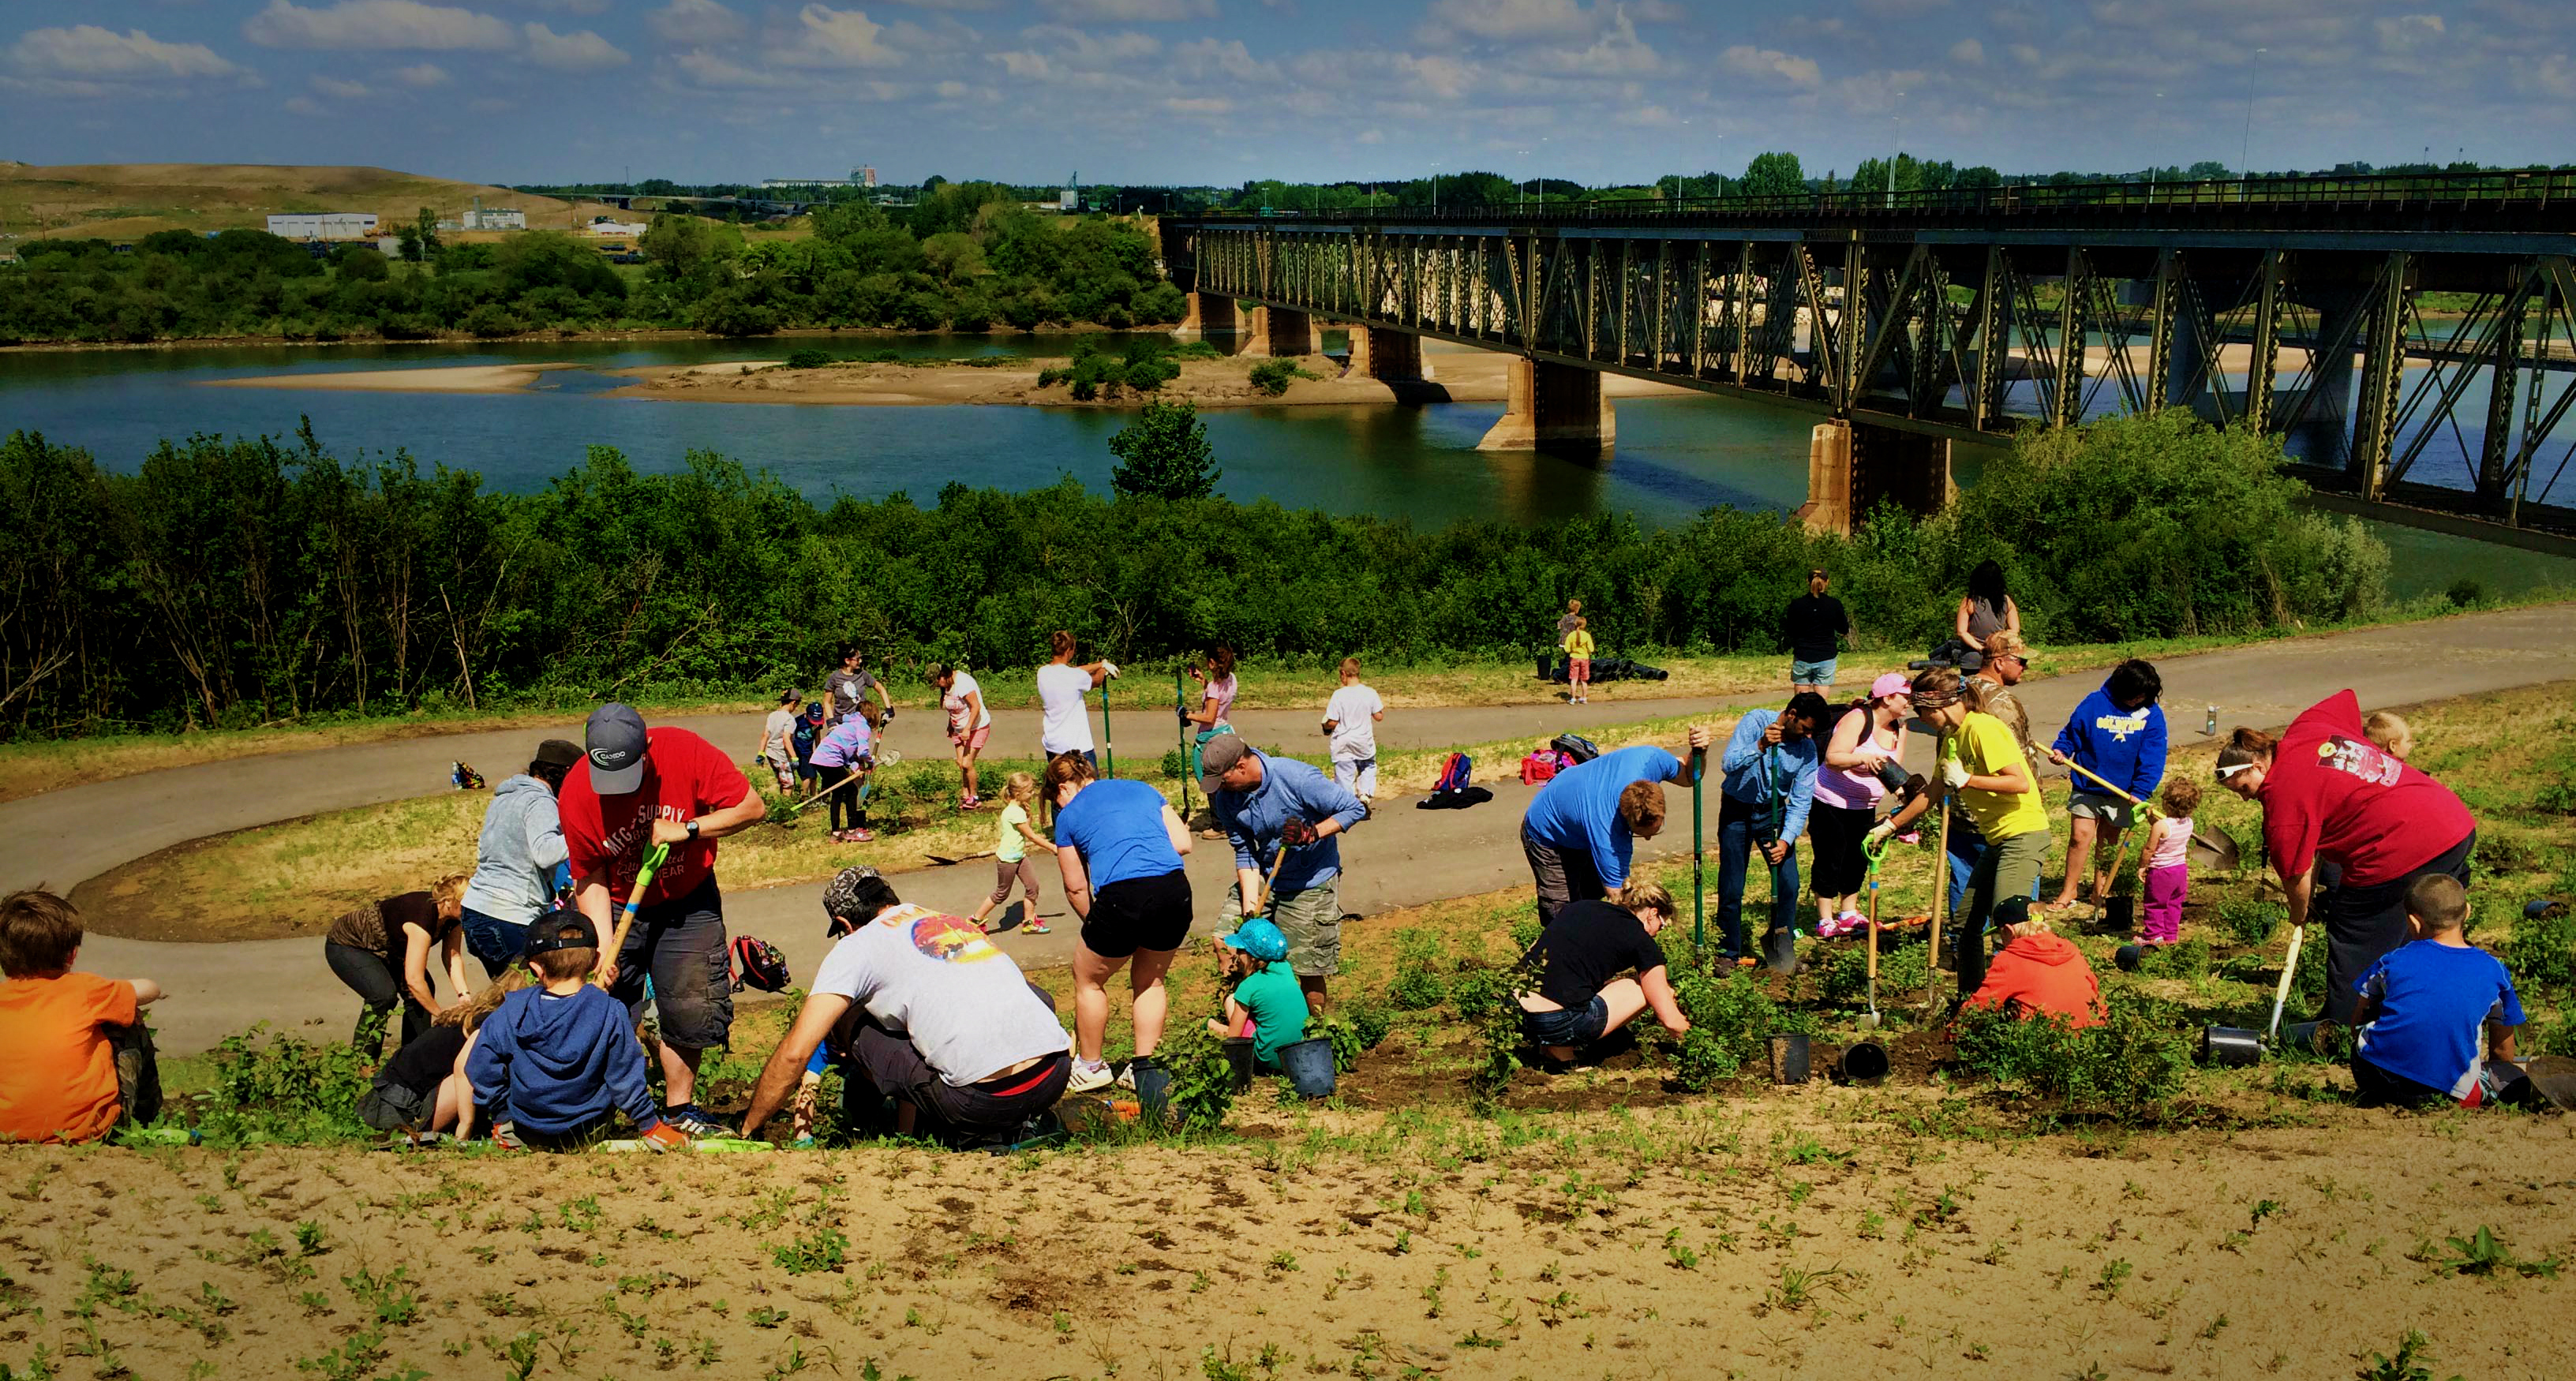 A group of people planting trees, with train tracks in the background.